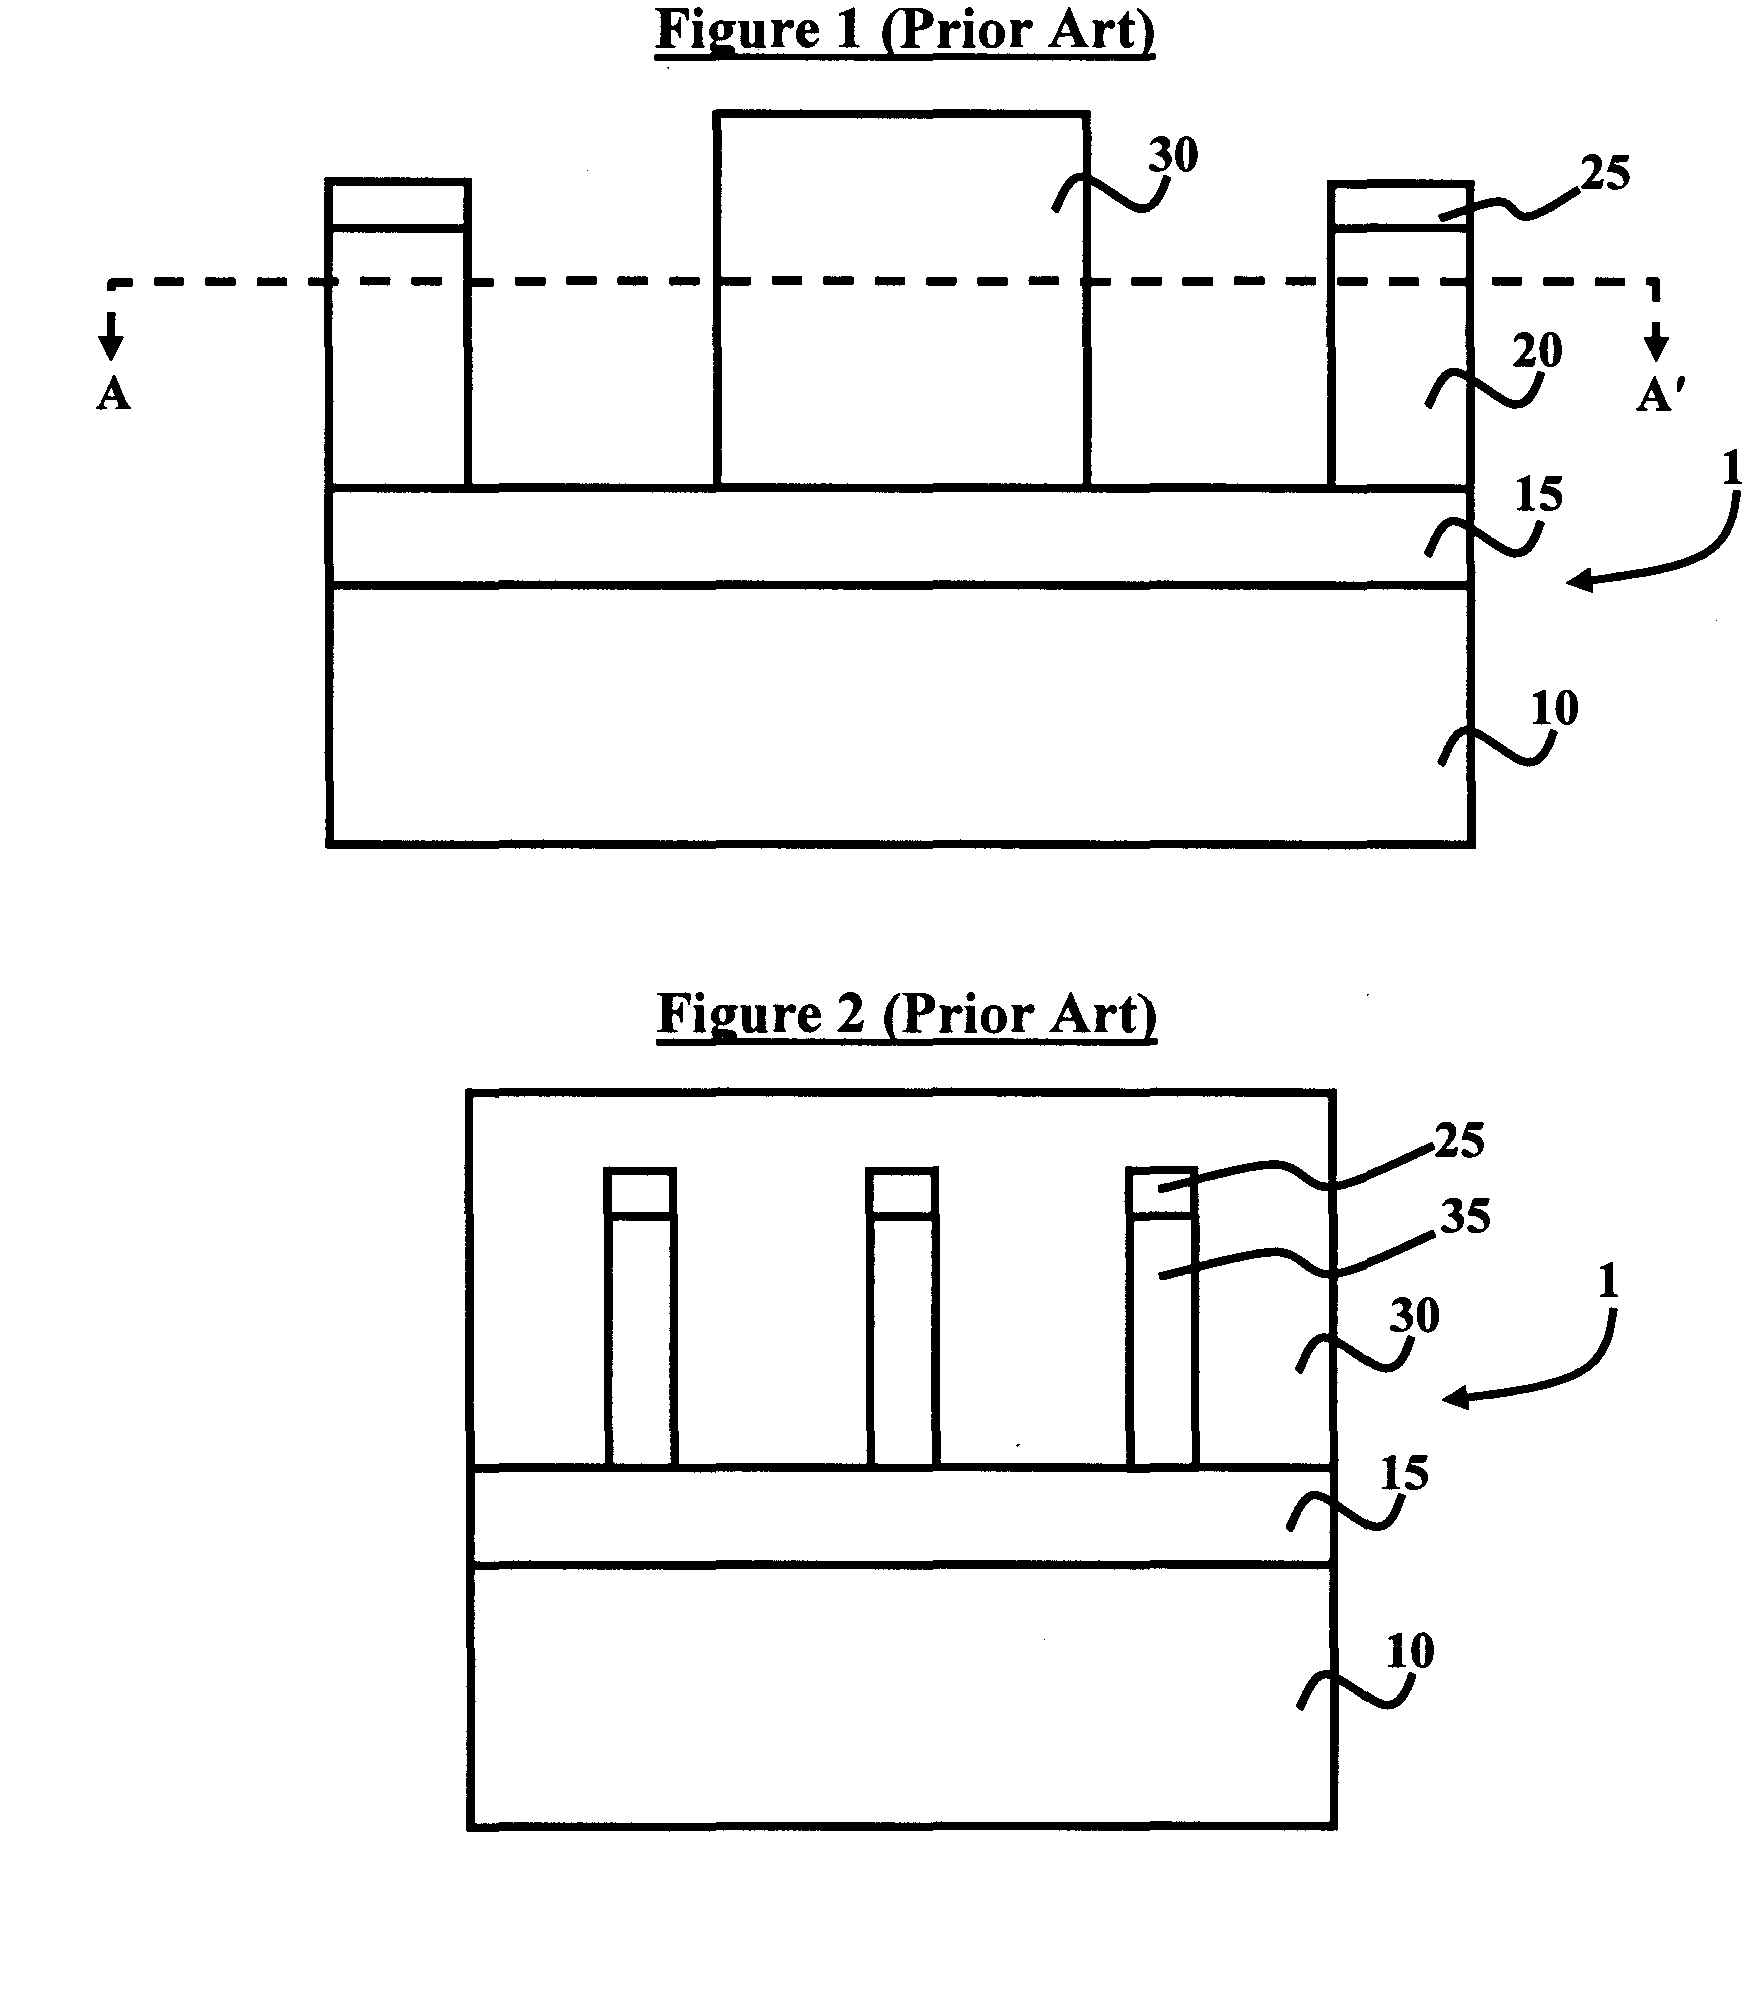 Finfet with low gate capacitance and low extrinsic resistance